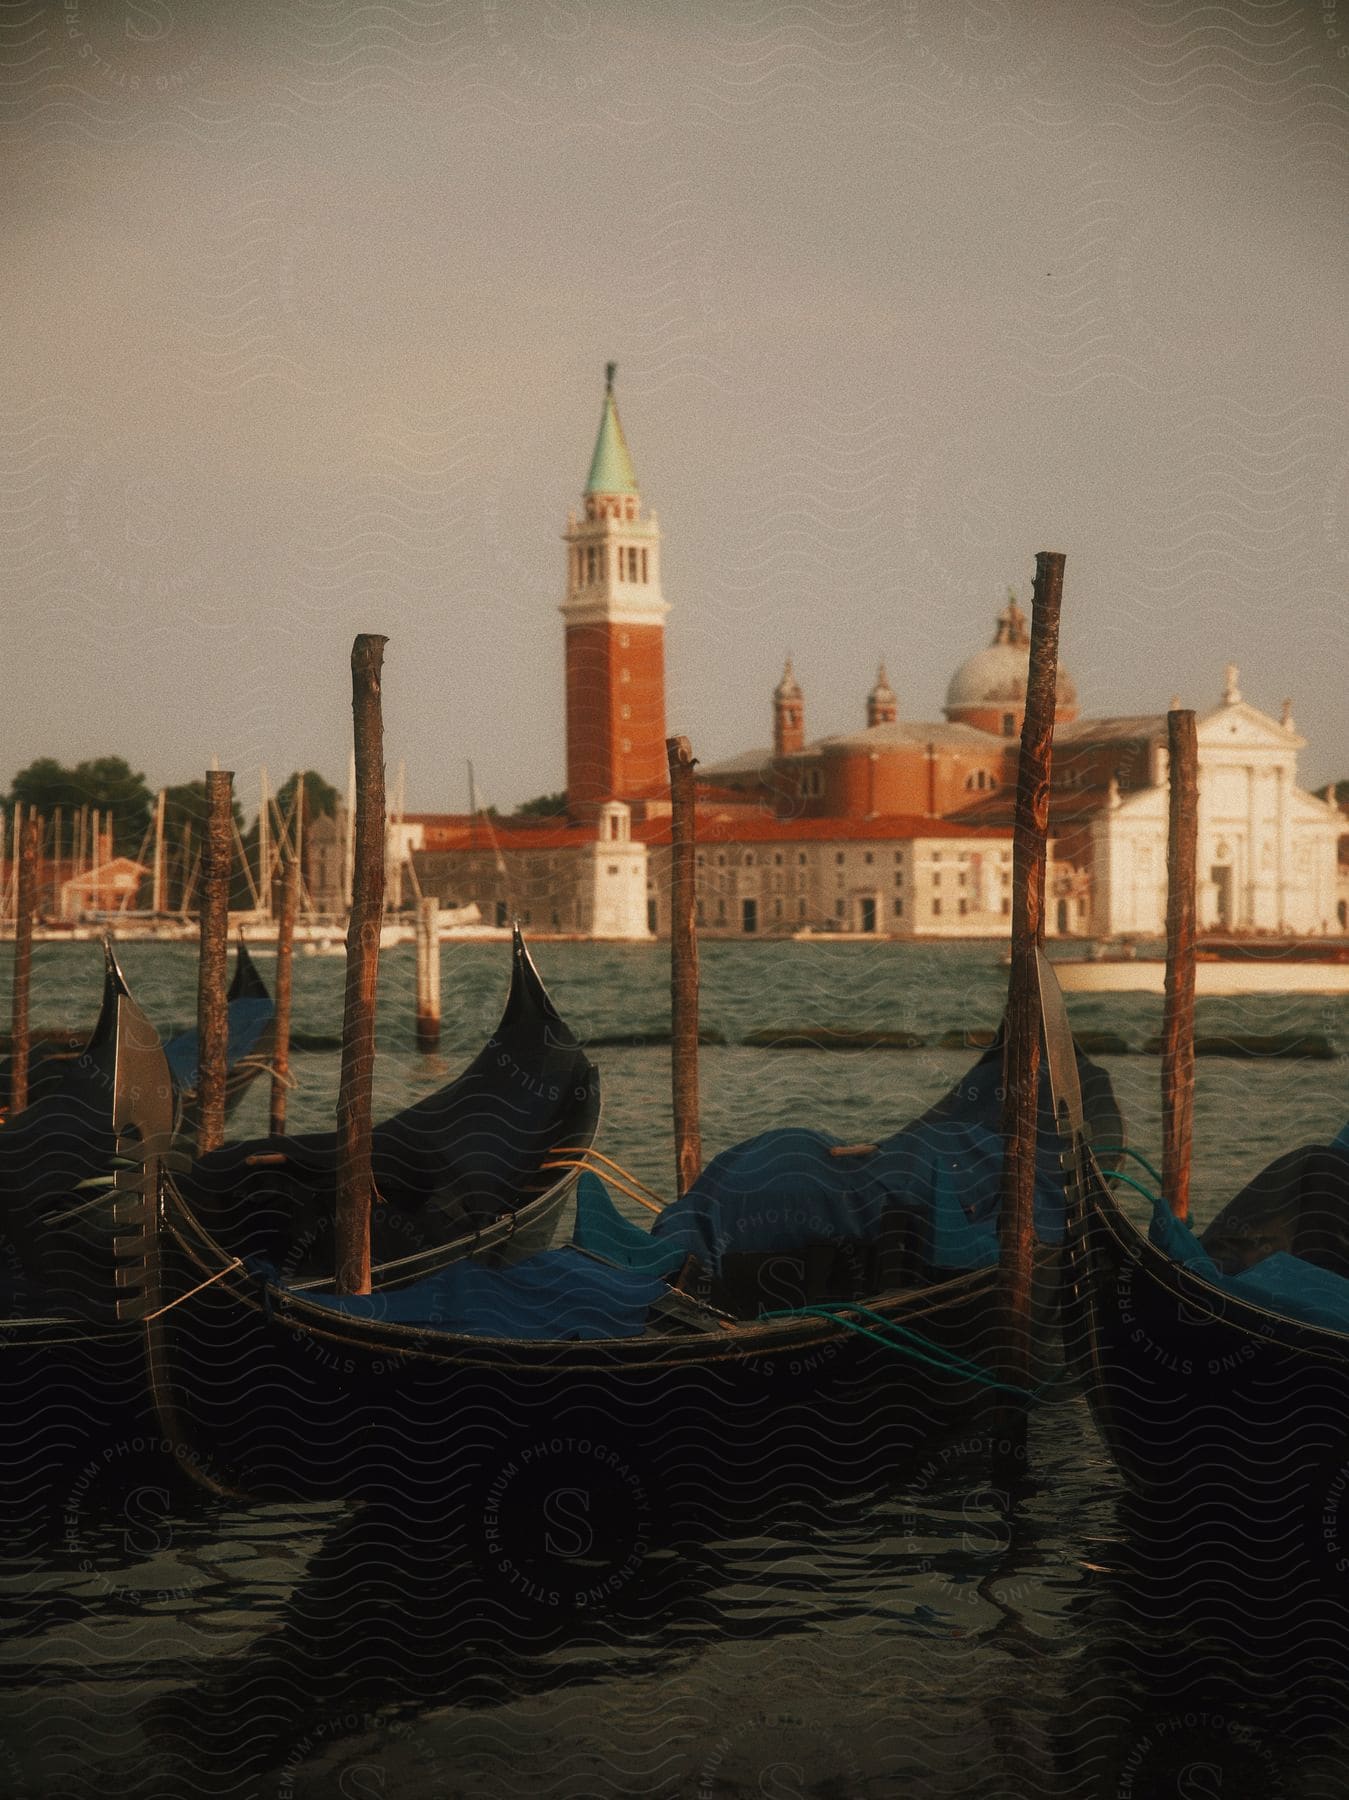 Gondolas float on the water with buildings and a tower along the coast